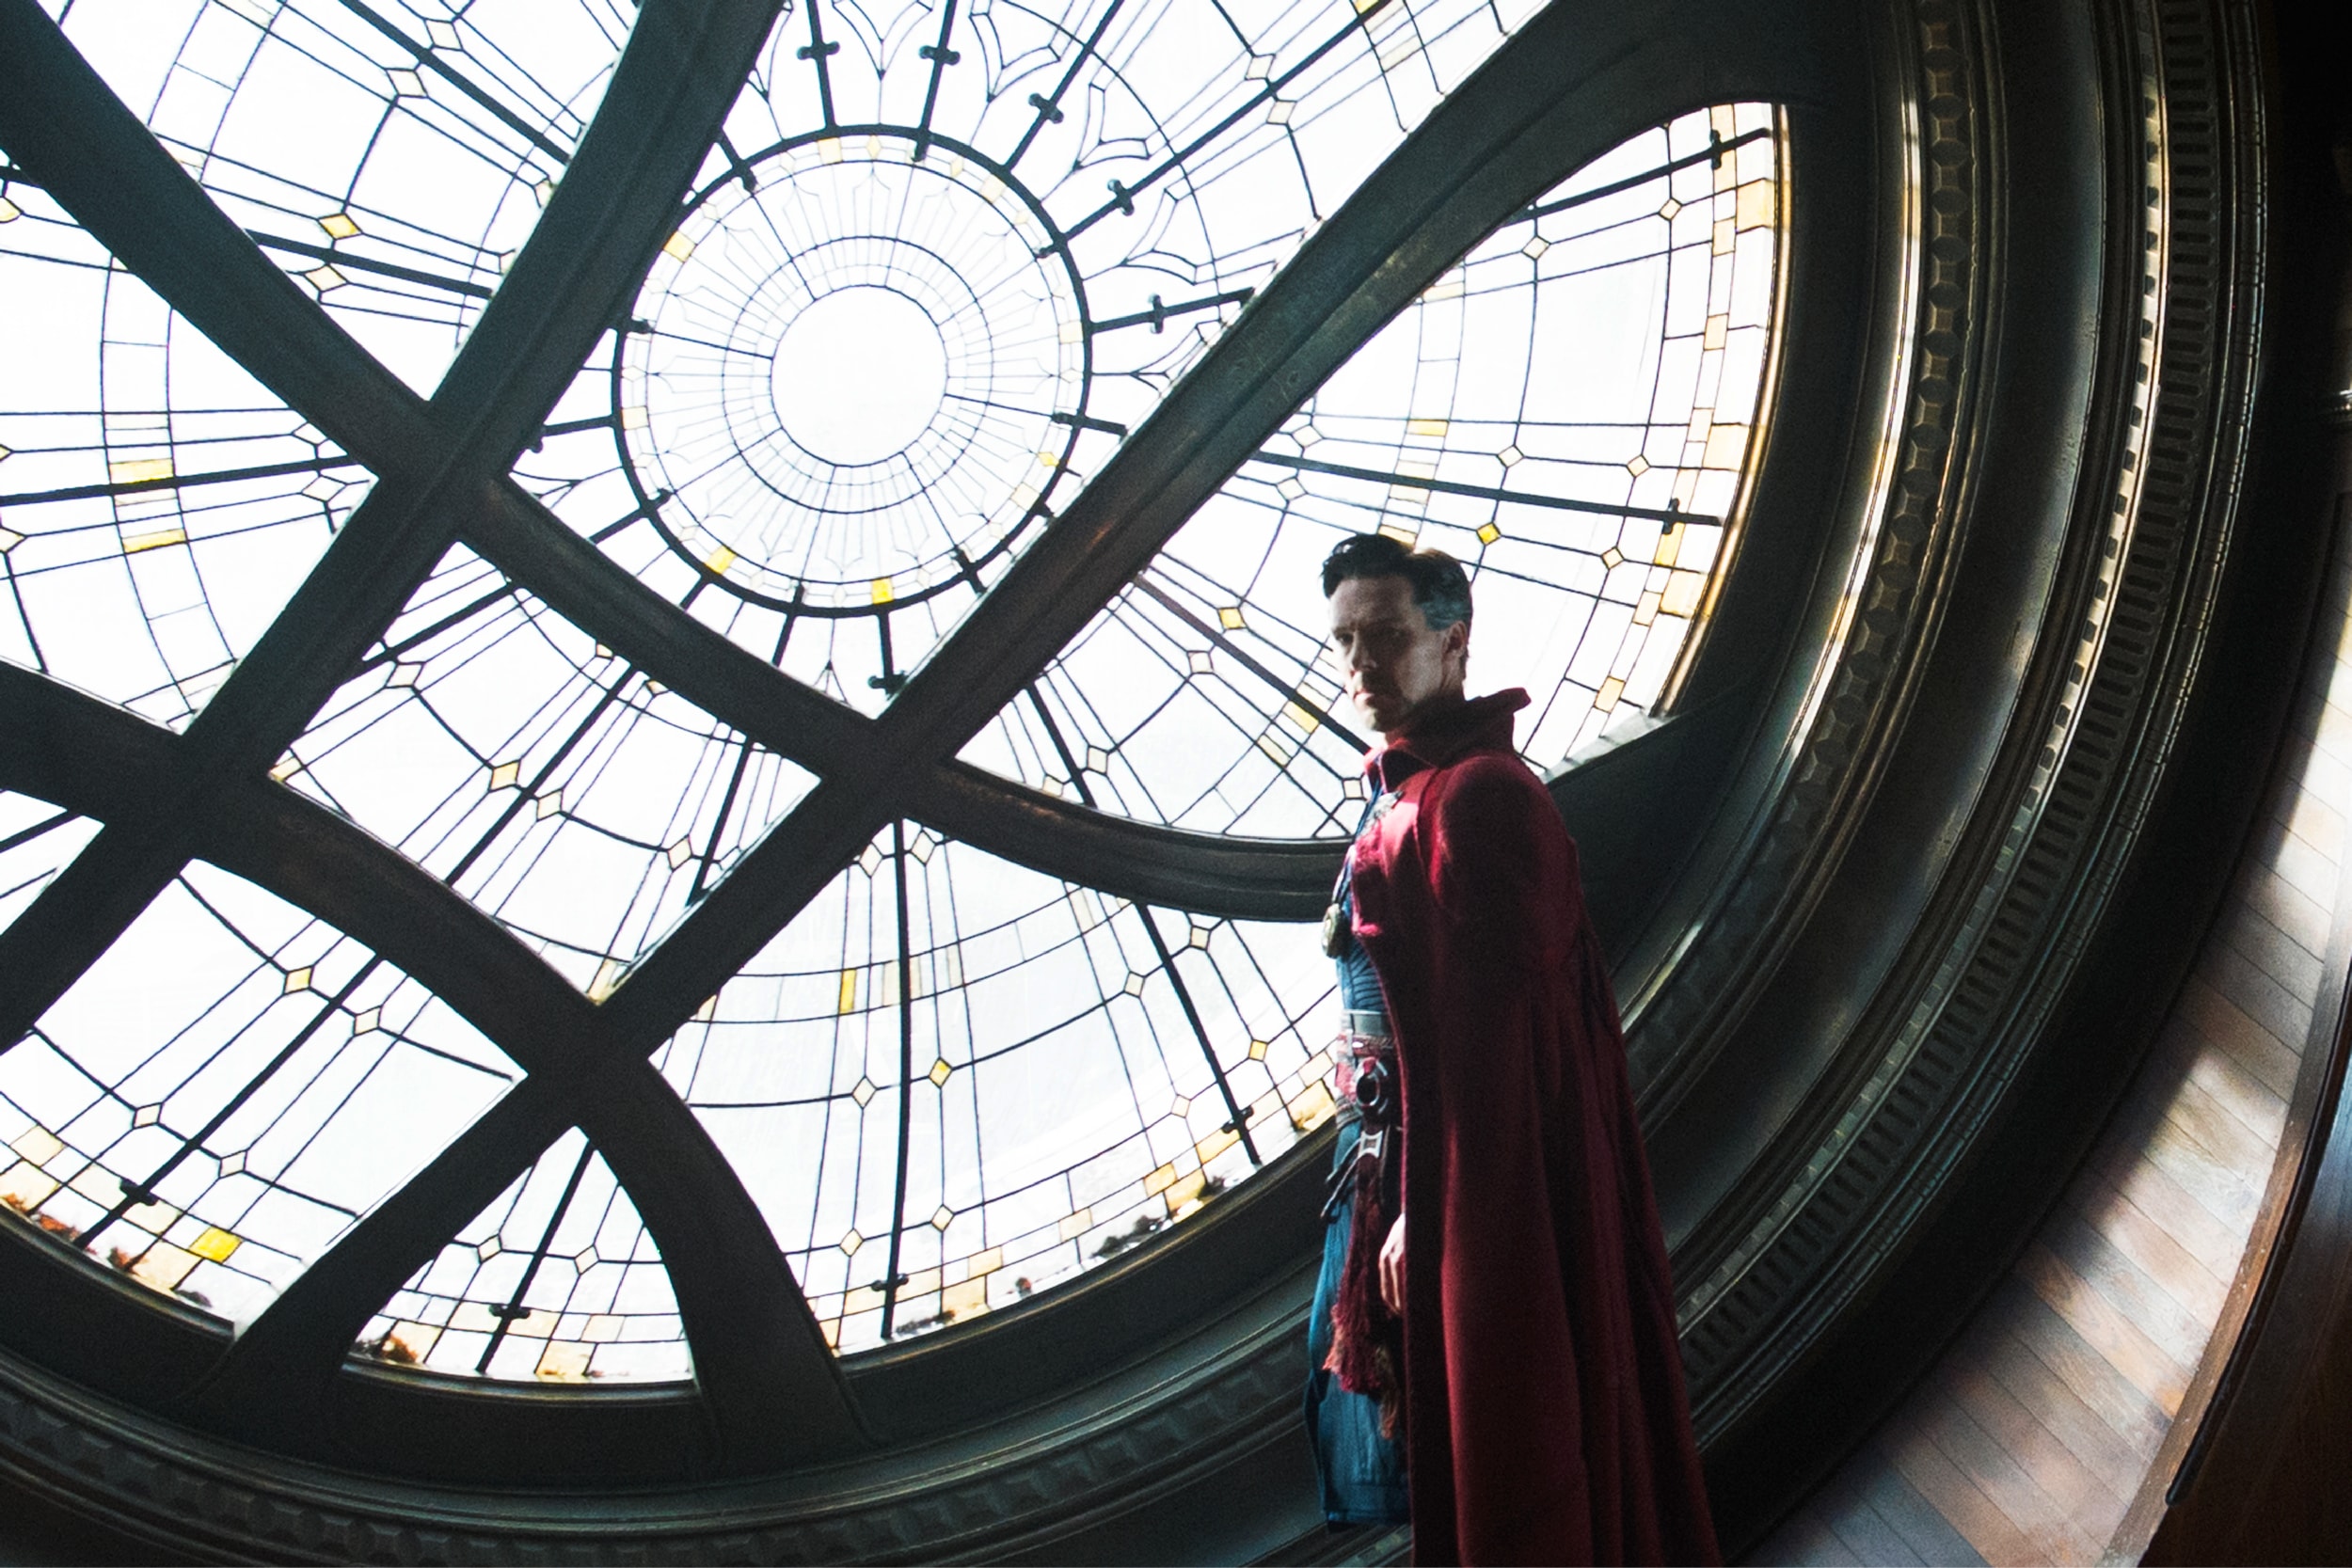 Doctor Strange Just Beat Out Iron Man For A New Record, Get The Details